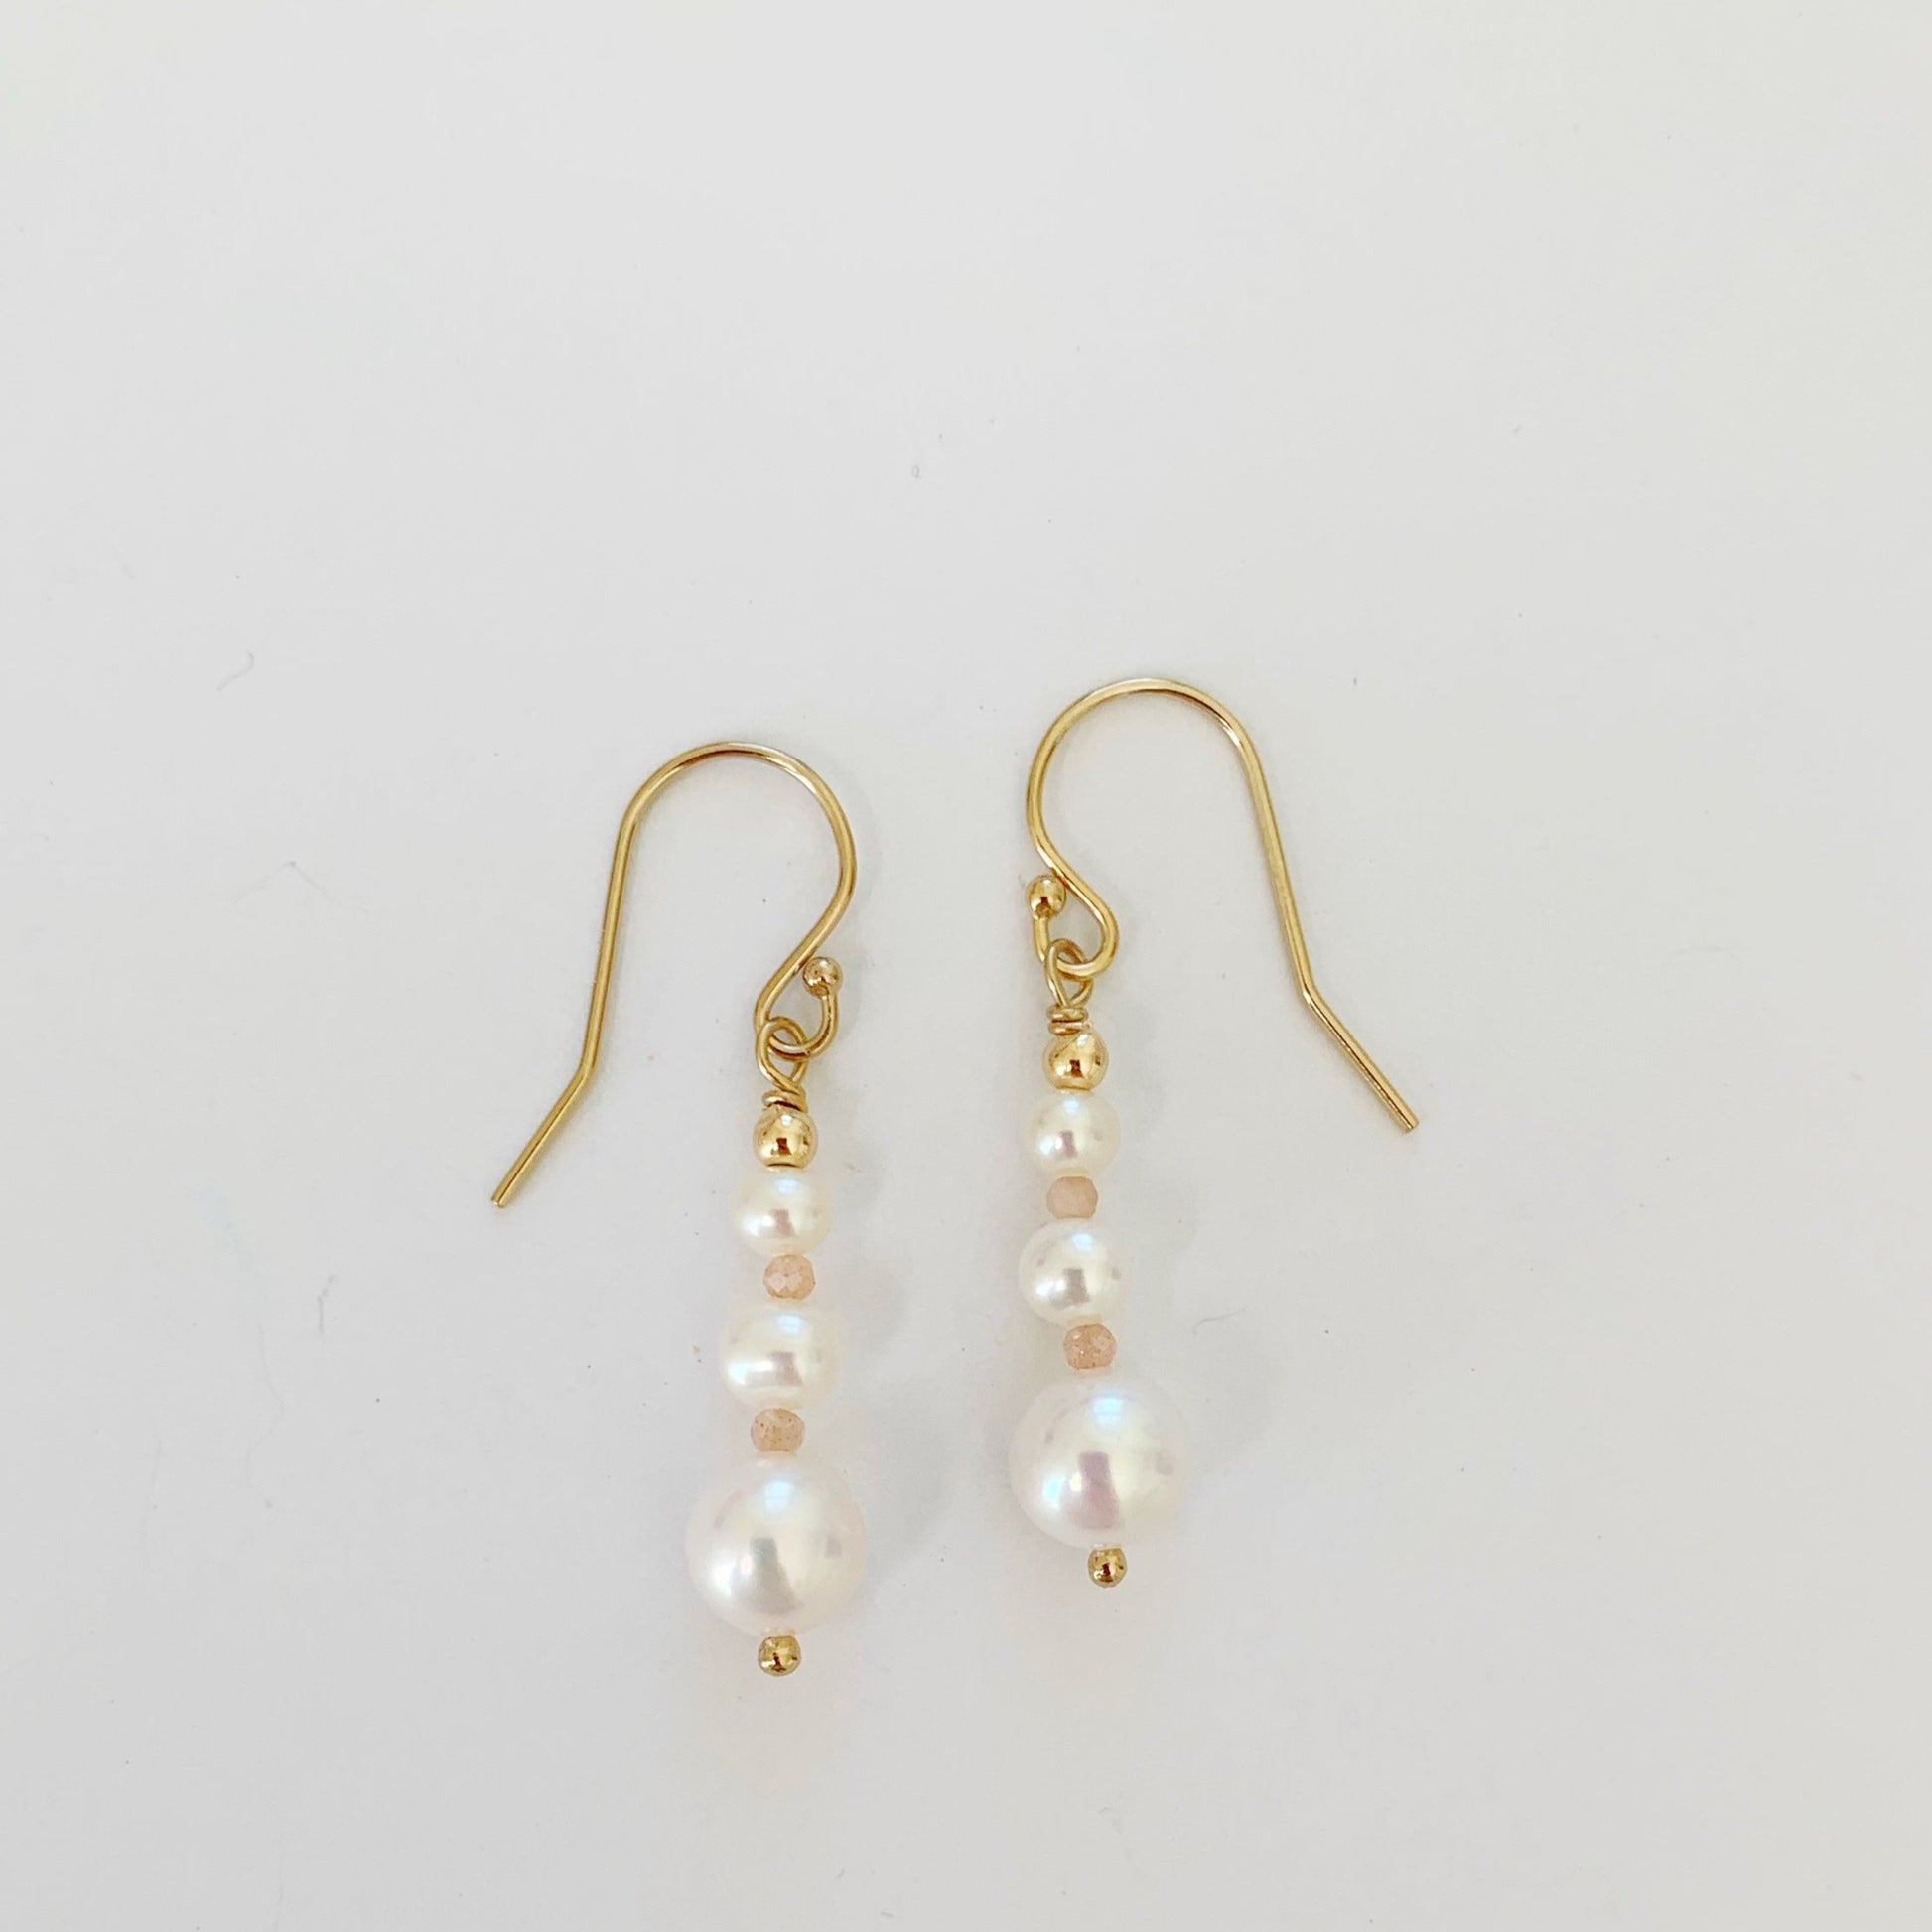 Barrington earrings by mermaids and madeleines are freshwater pearl linear drop earrings with peach moonstone and 14k gold filled findings. this pair is pictured on a white background